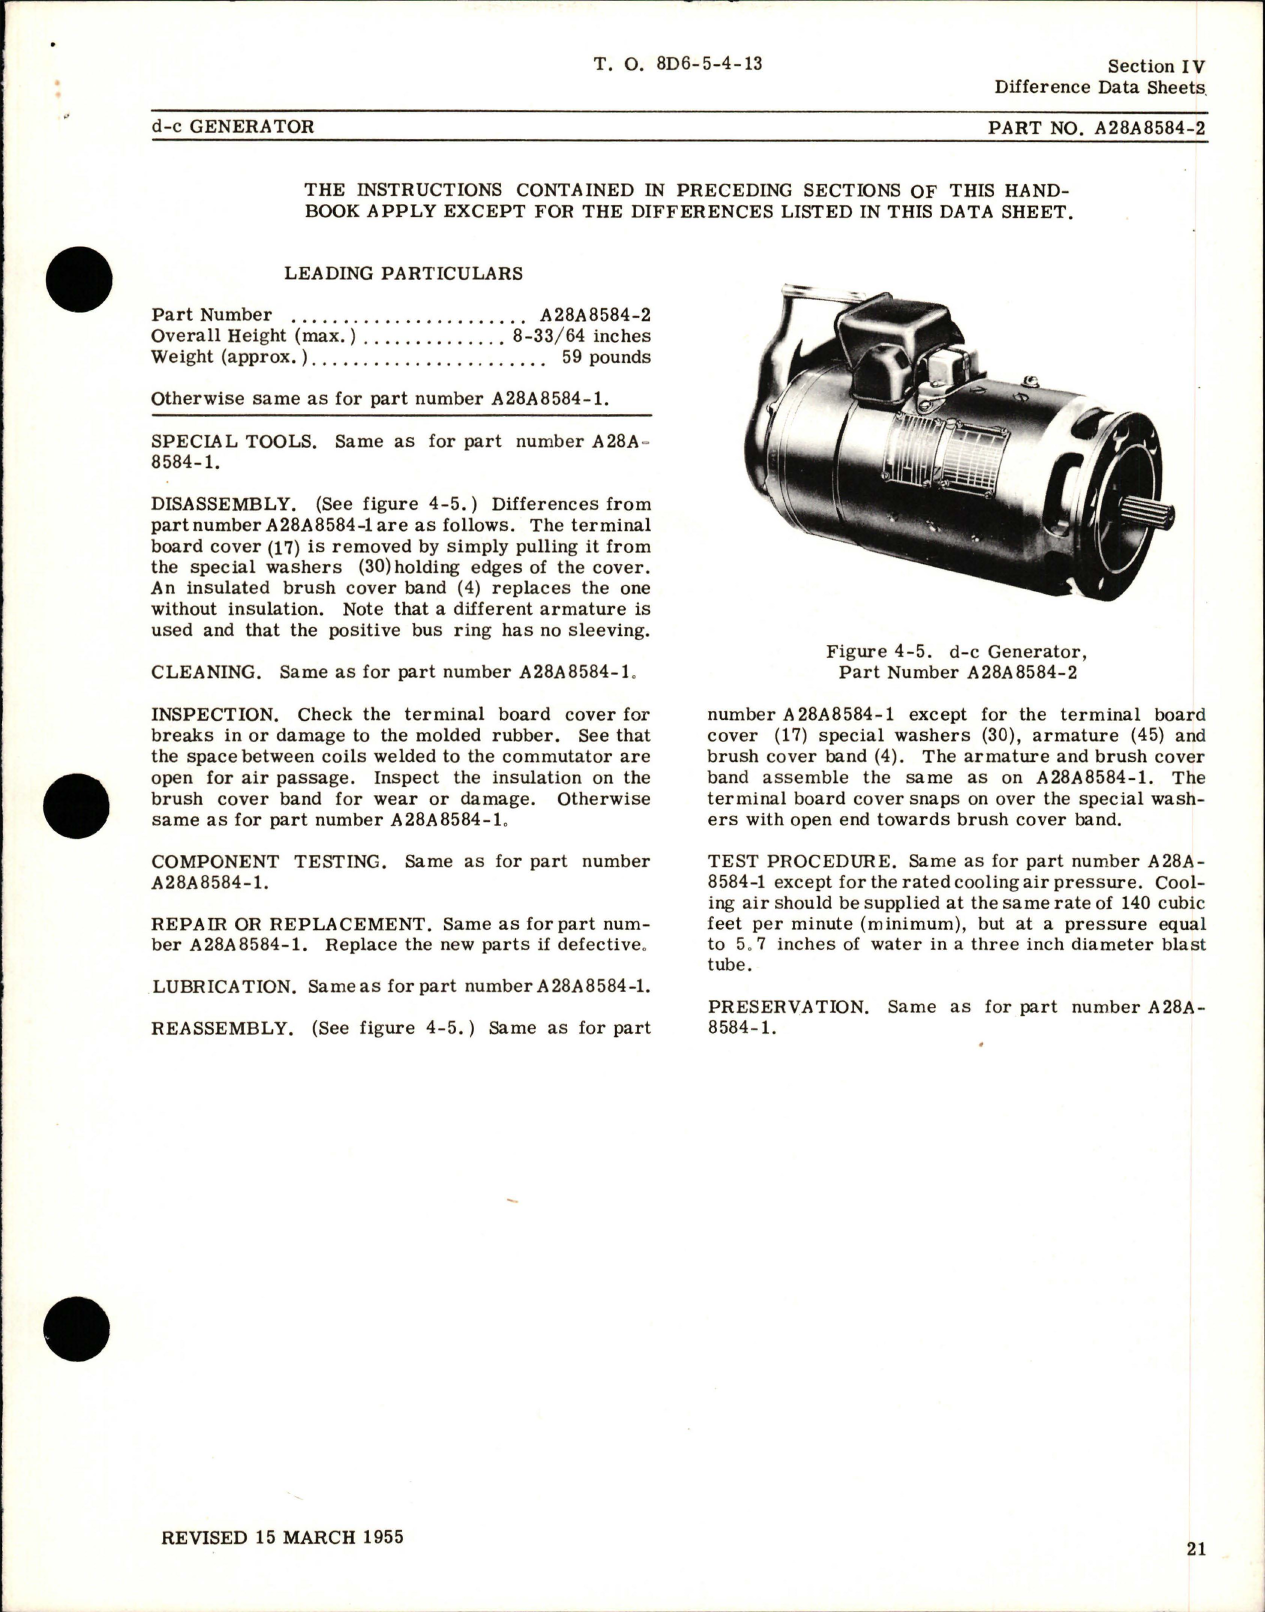 Sample page 5 from AirCorps Library document: Overhaul Instructions for DC Generator